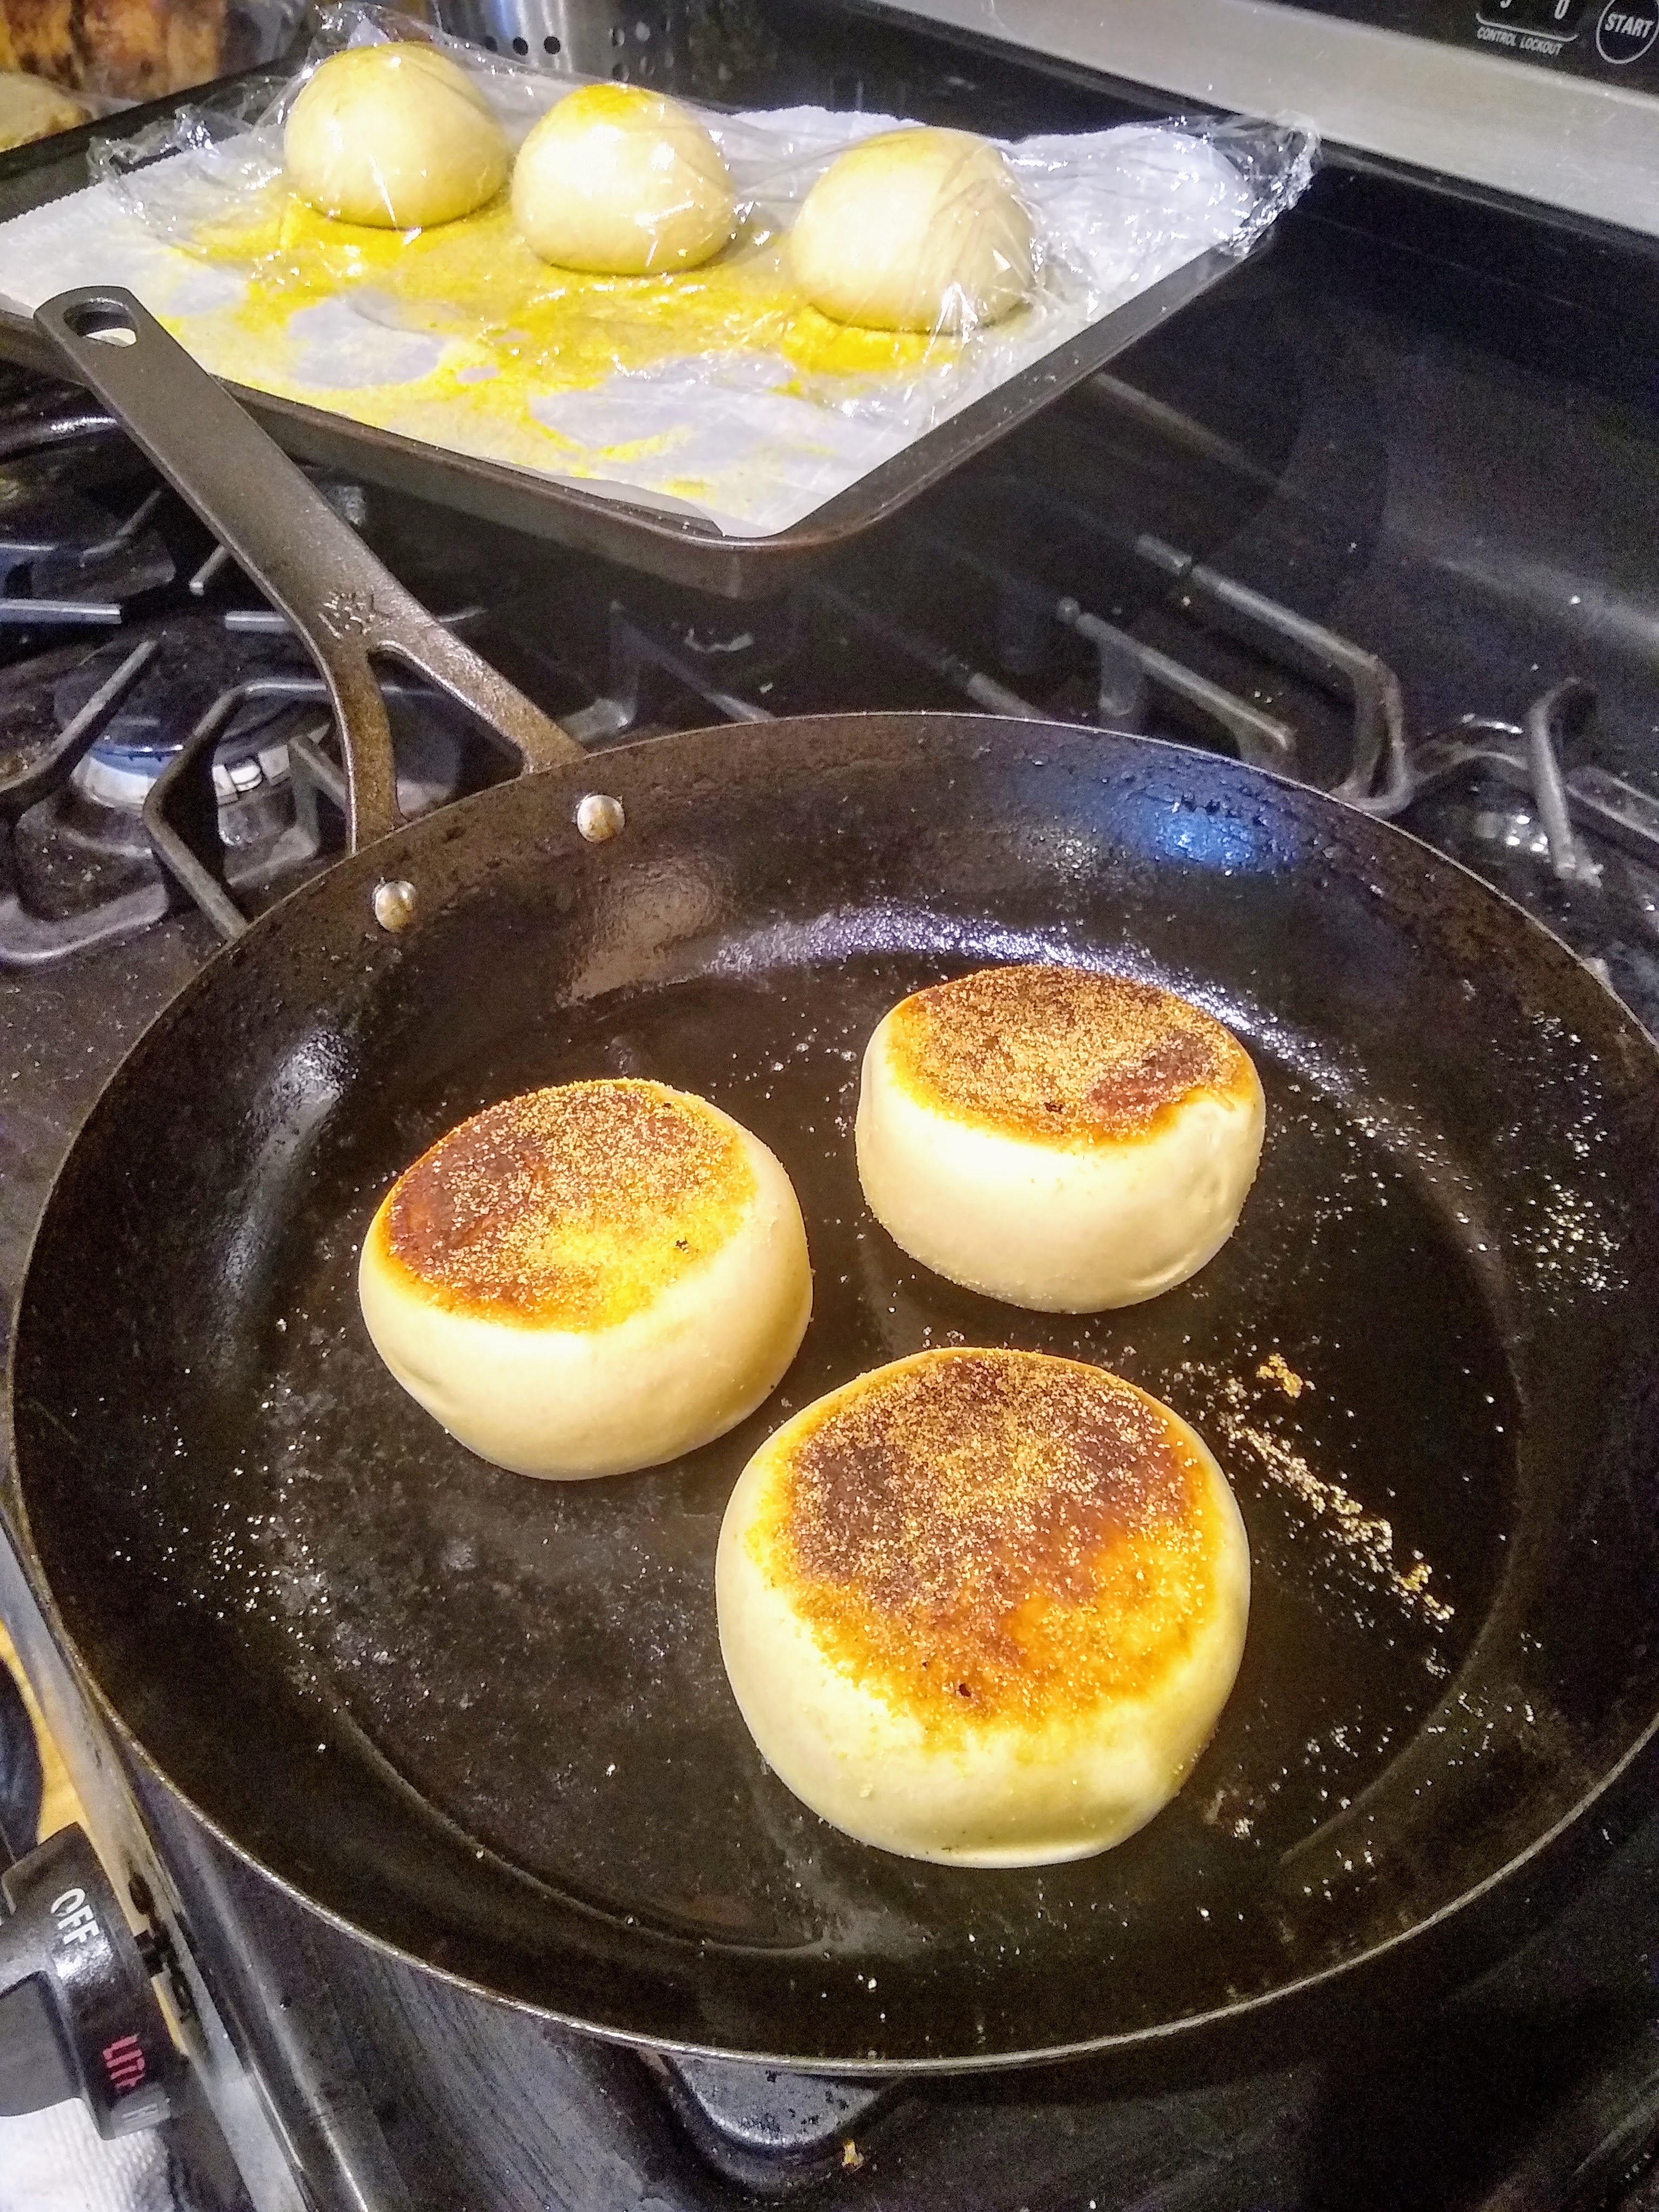 English muffins cooking in a cast iron pan